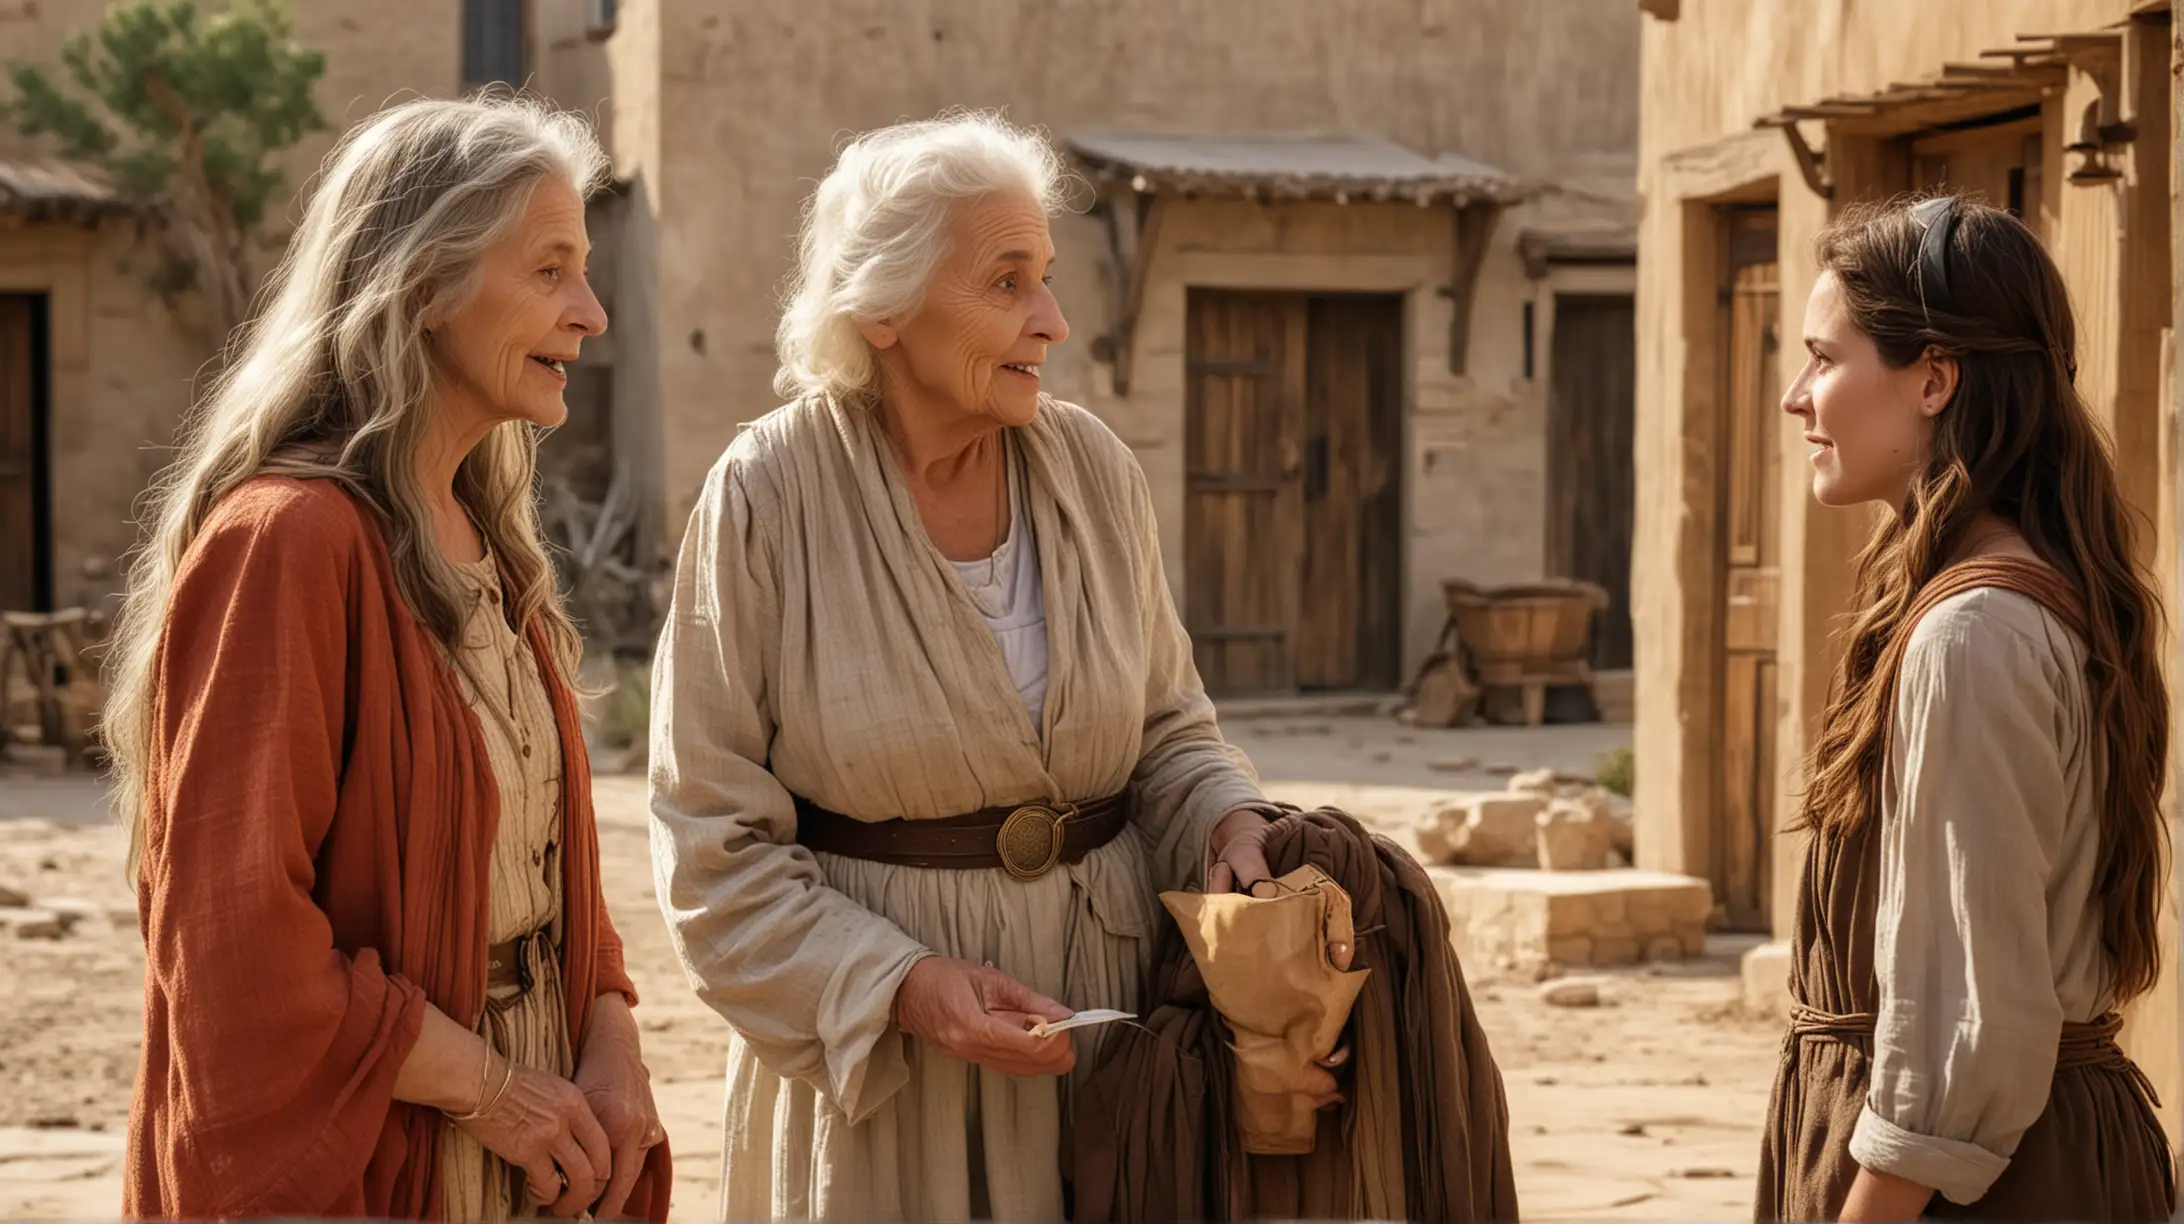 Elderly Woman Conversing with Two Elegant Young Women in Ancient Desert Town